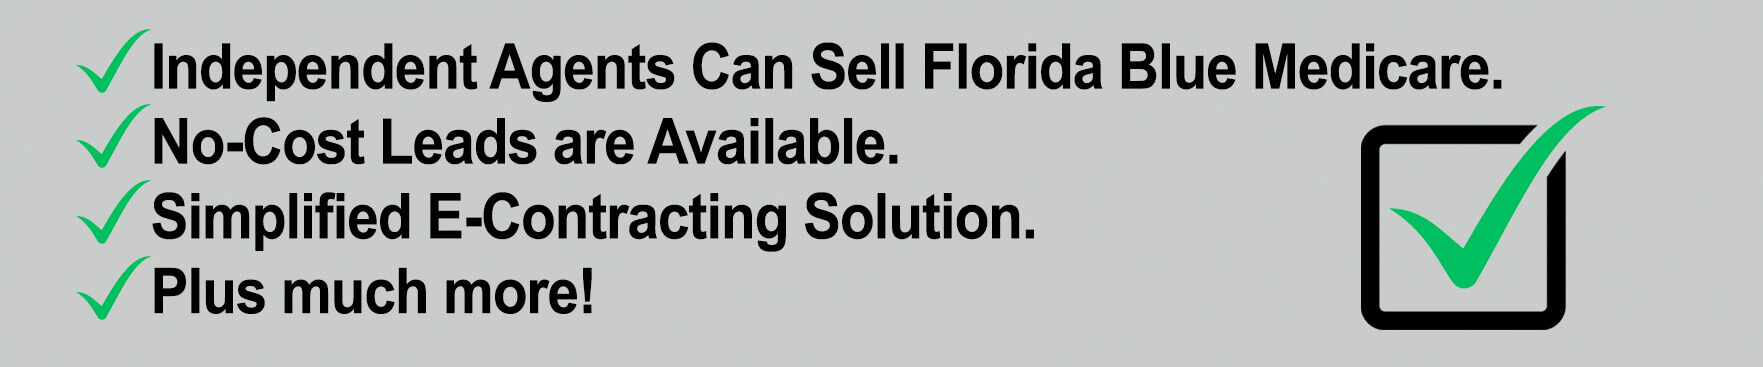 Independent agents can sell Florida Medicare. No-Cost leads are available. Simplified E-contracting solution. Plus much more